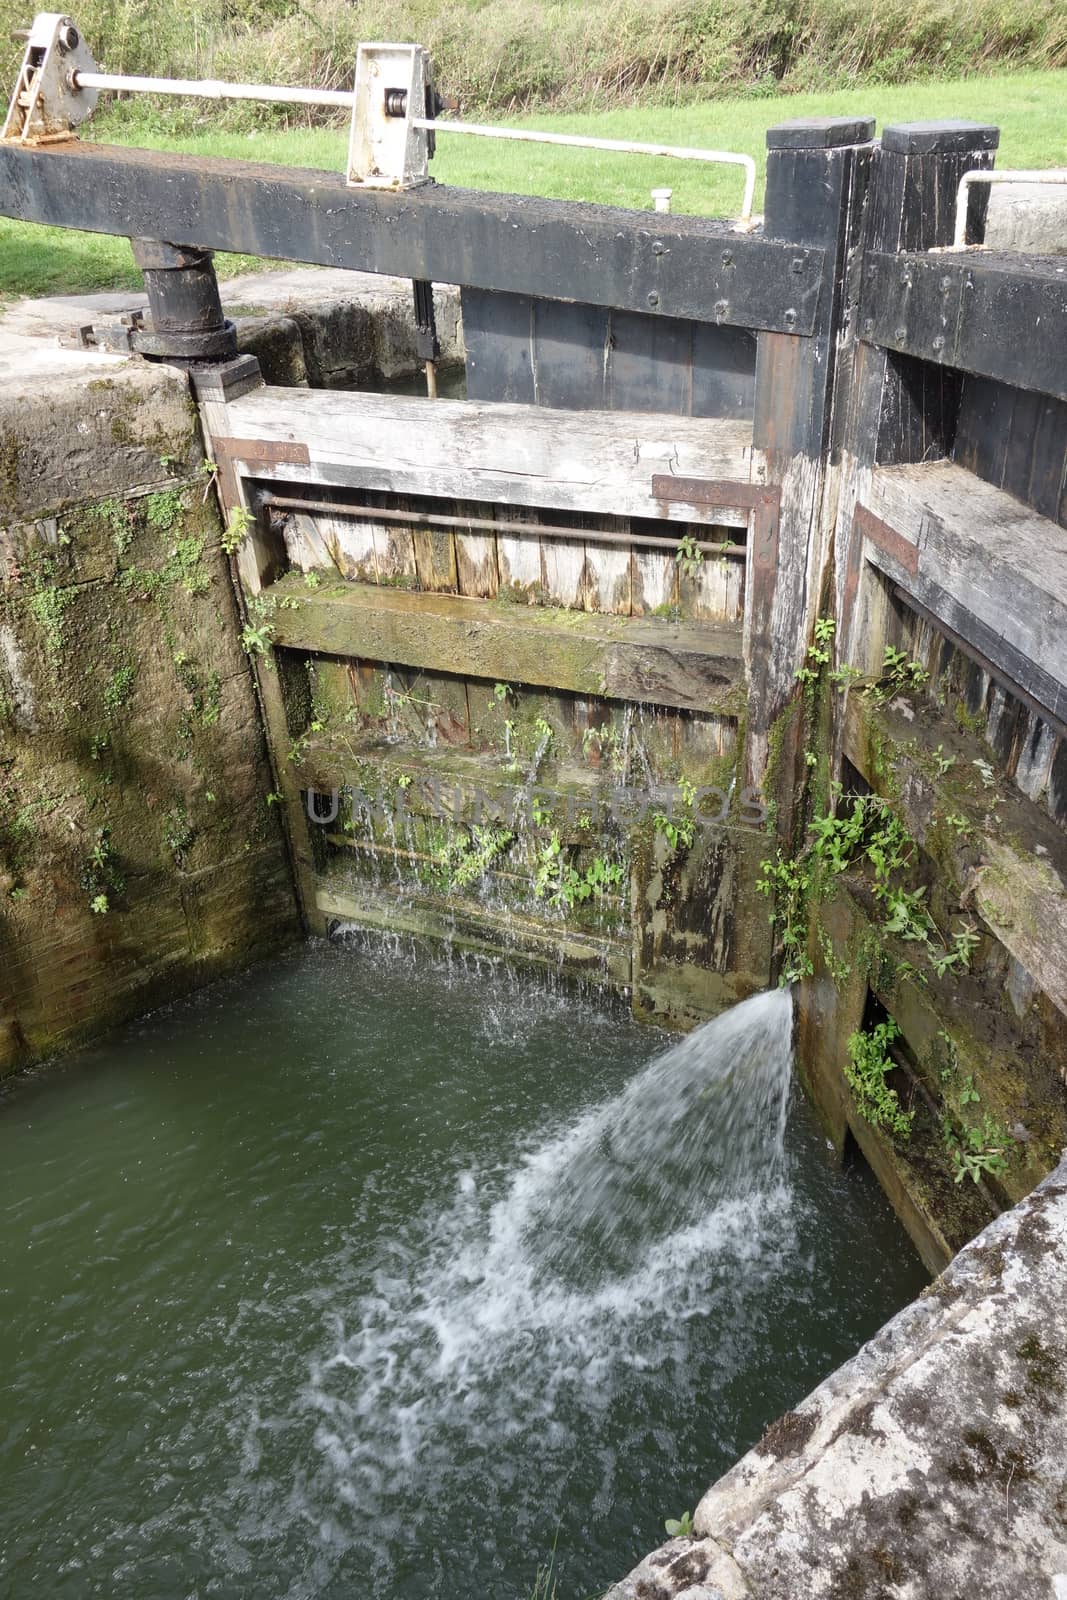 Lock filling with water from opening in lock gates, Caen Hill Locks, Wiltshire, England